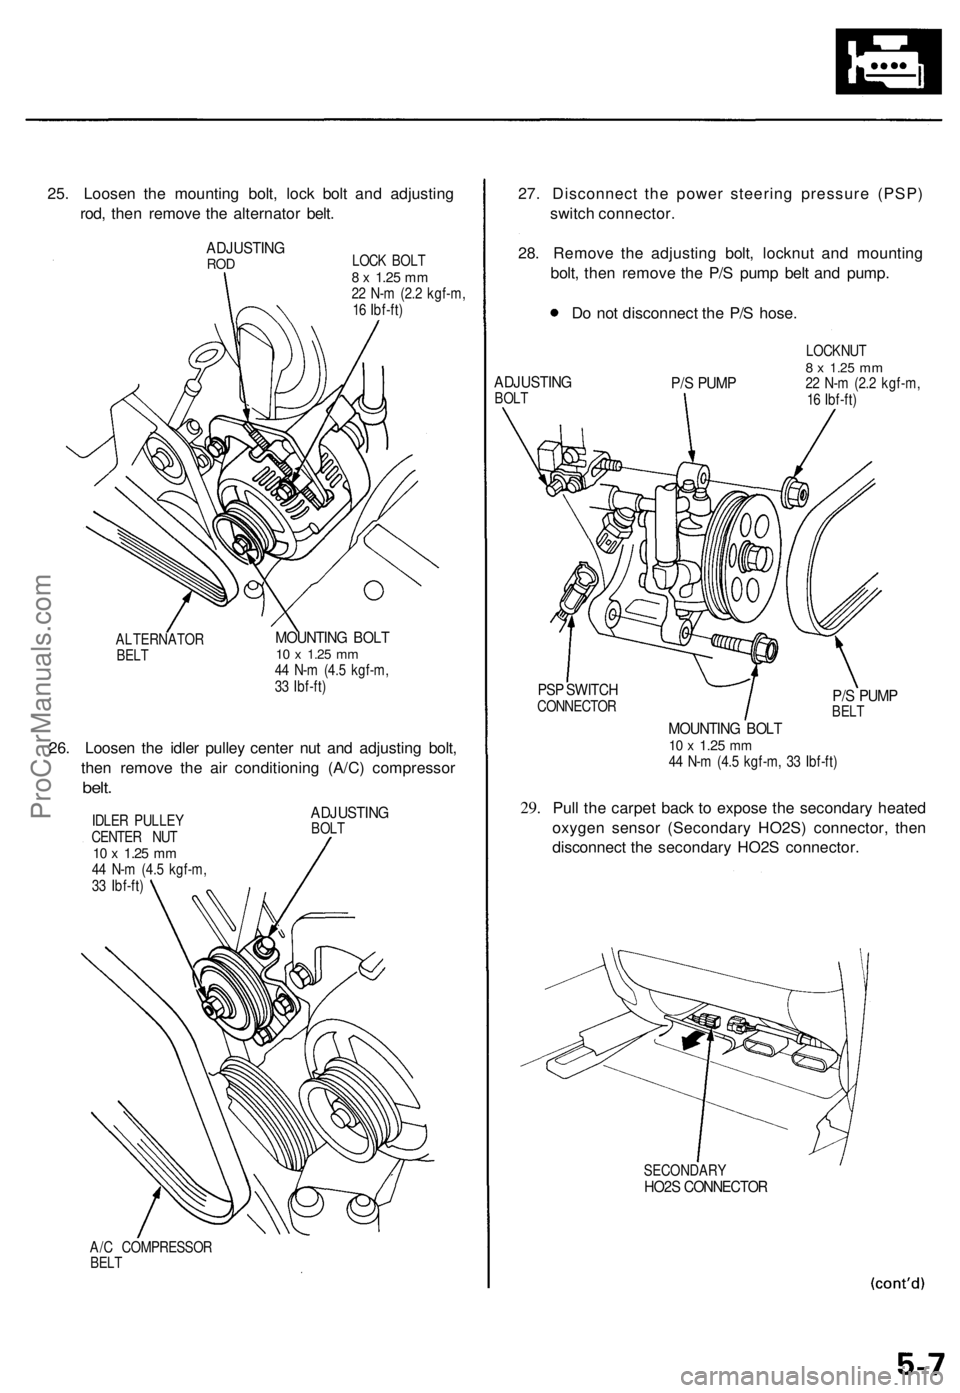 ACURA TL 1995  Service Service Manual 
25. Loosen the mounting bolt, lock bolt and adjusting

rod, then remove the alternator belt.

ADJUSTING

ROD 
LOCK BOLT

8 x
 1.25
 mm

22 N-m (2.2 kgf-m,

16 Ibf-ft)

ALTERNATOR

BELT 
MOUNTING BOLT